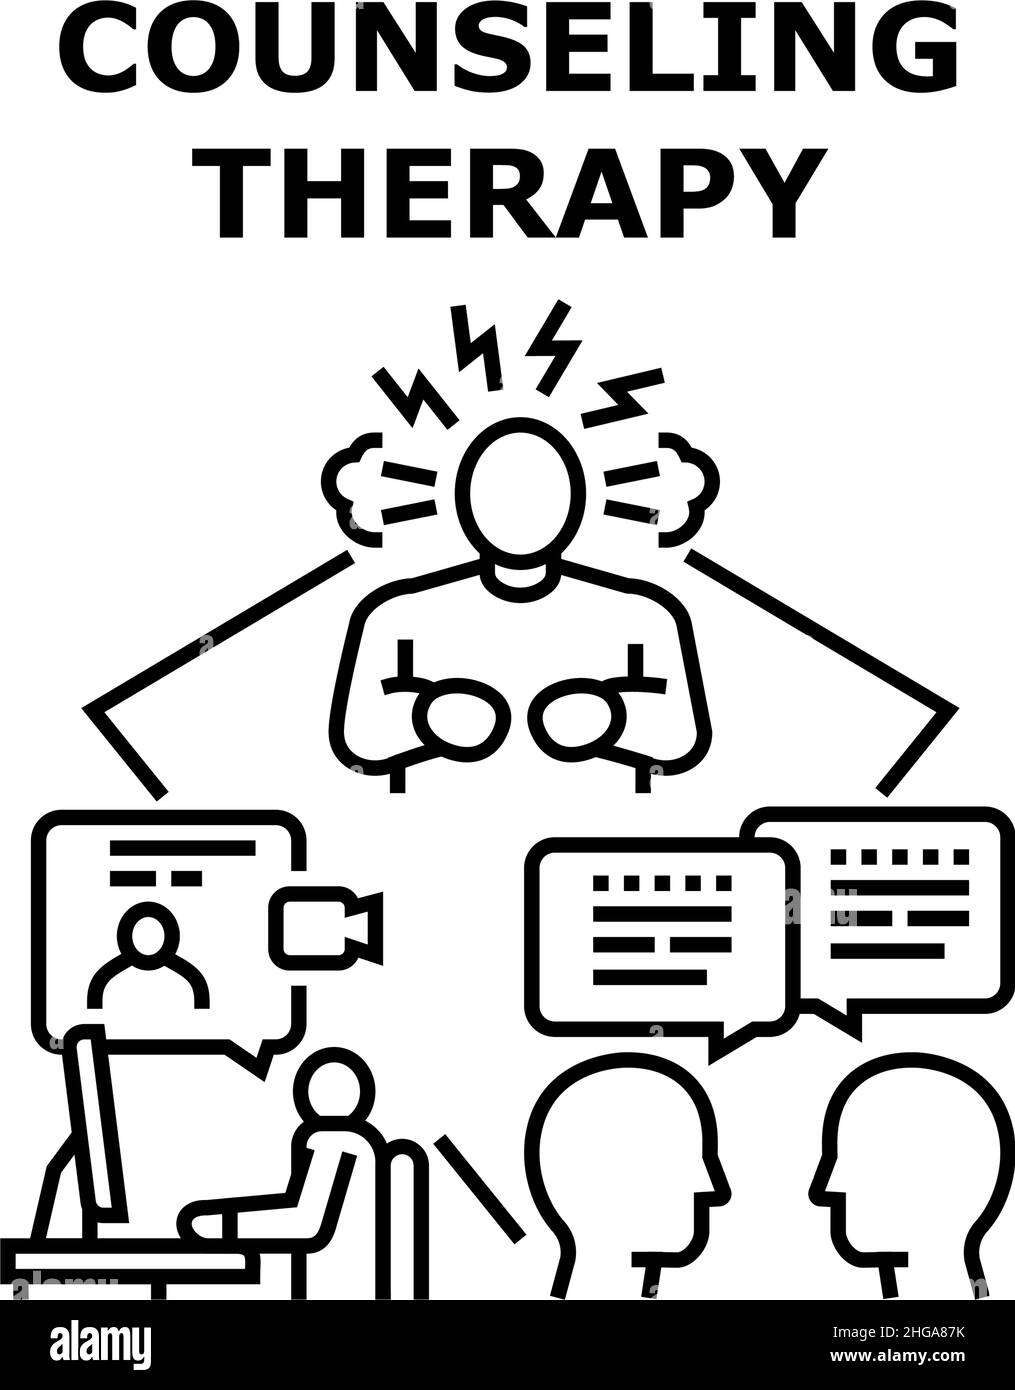 Counseling therapy icon vector illustration Stock Vector